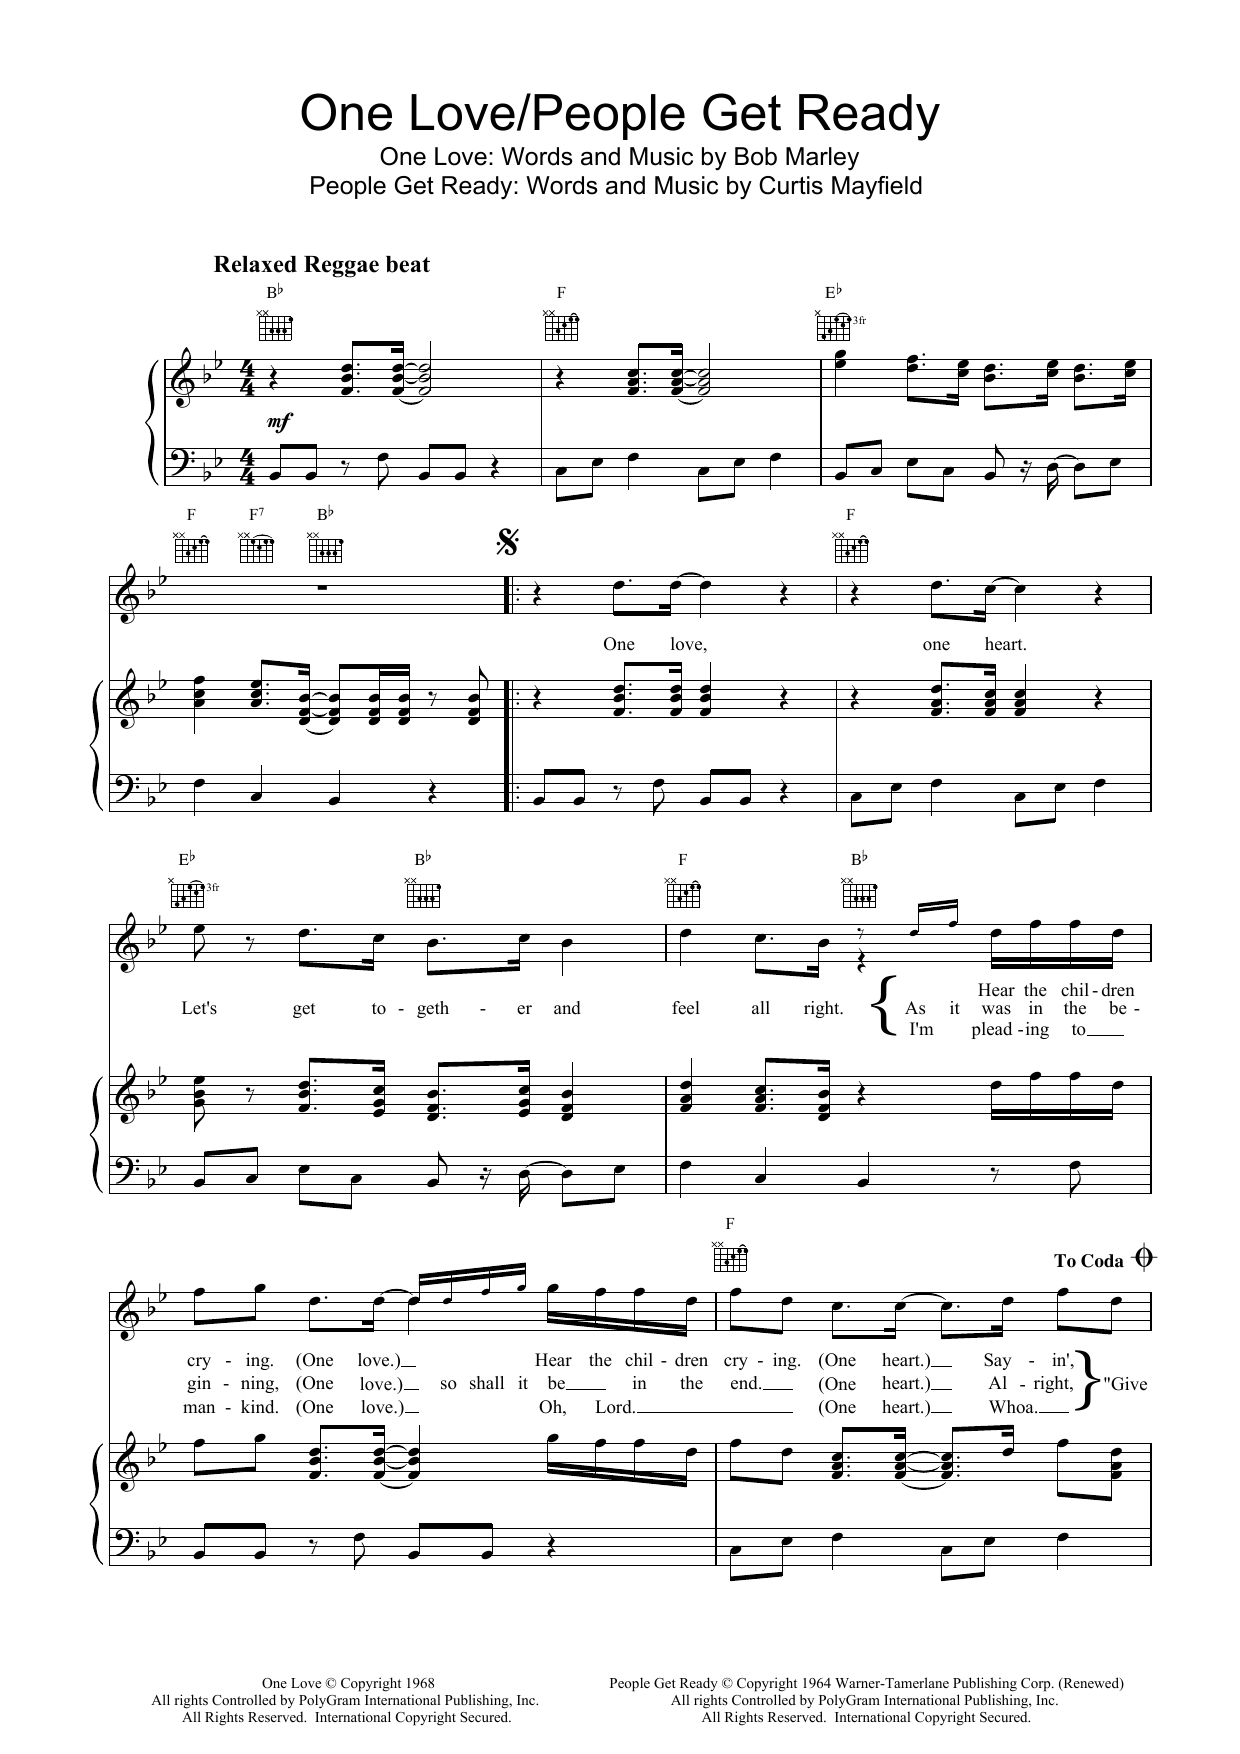 Bob Marley One Love/People Get Ready sheet music notes and chords. Download Printable PDF.